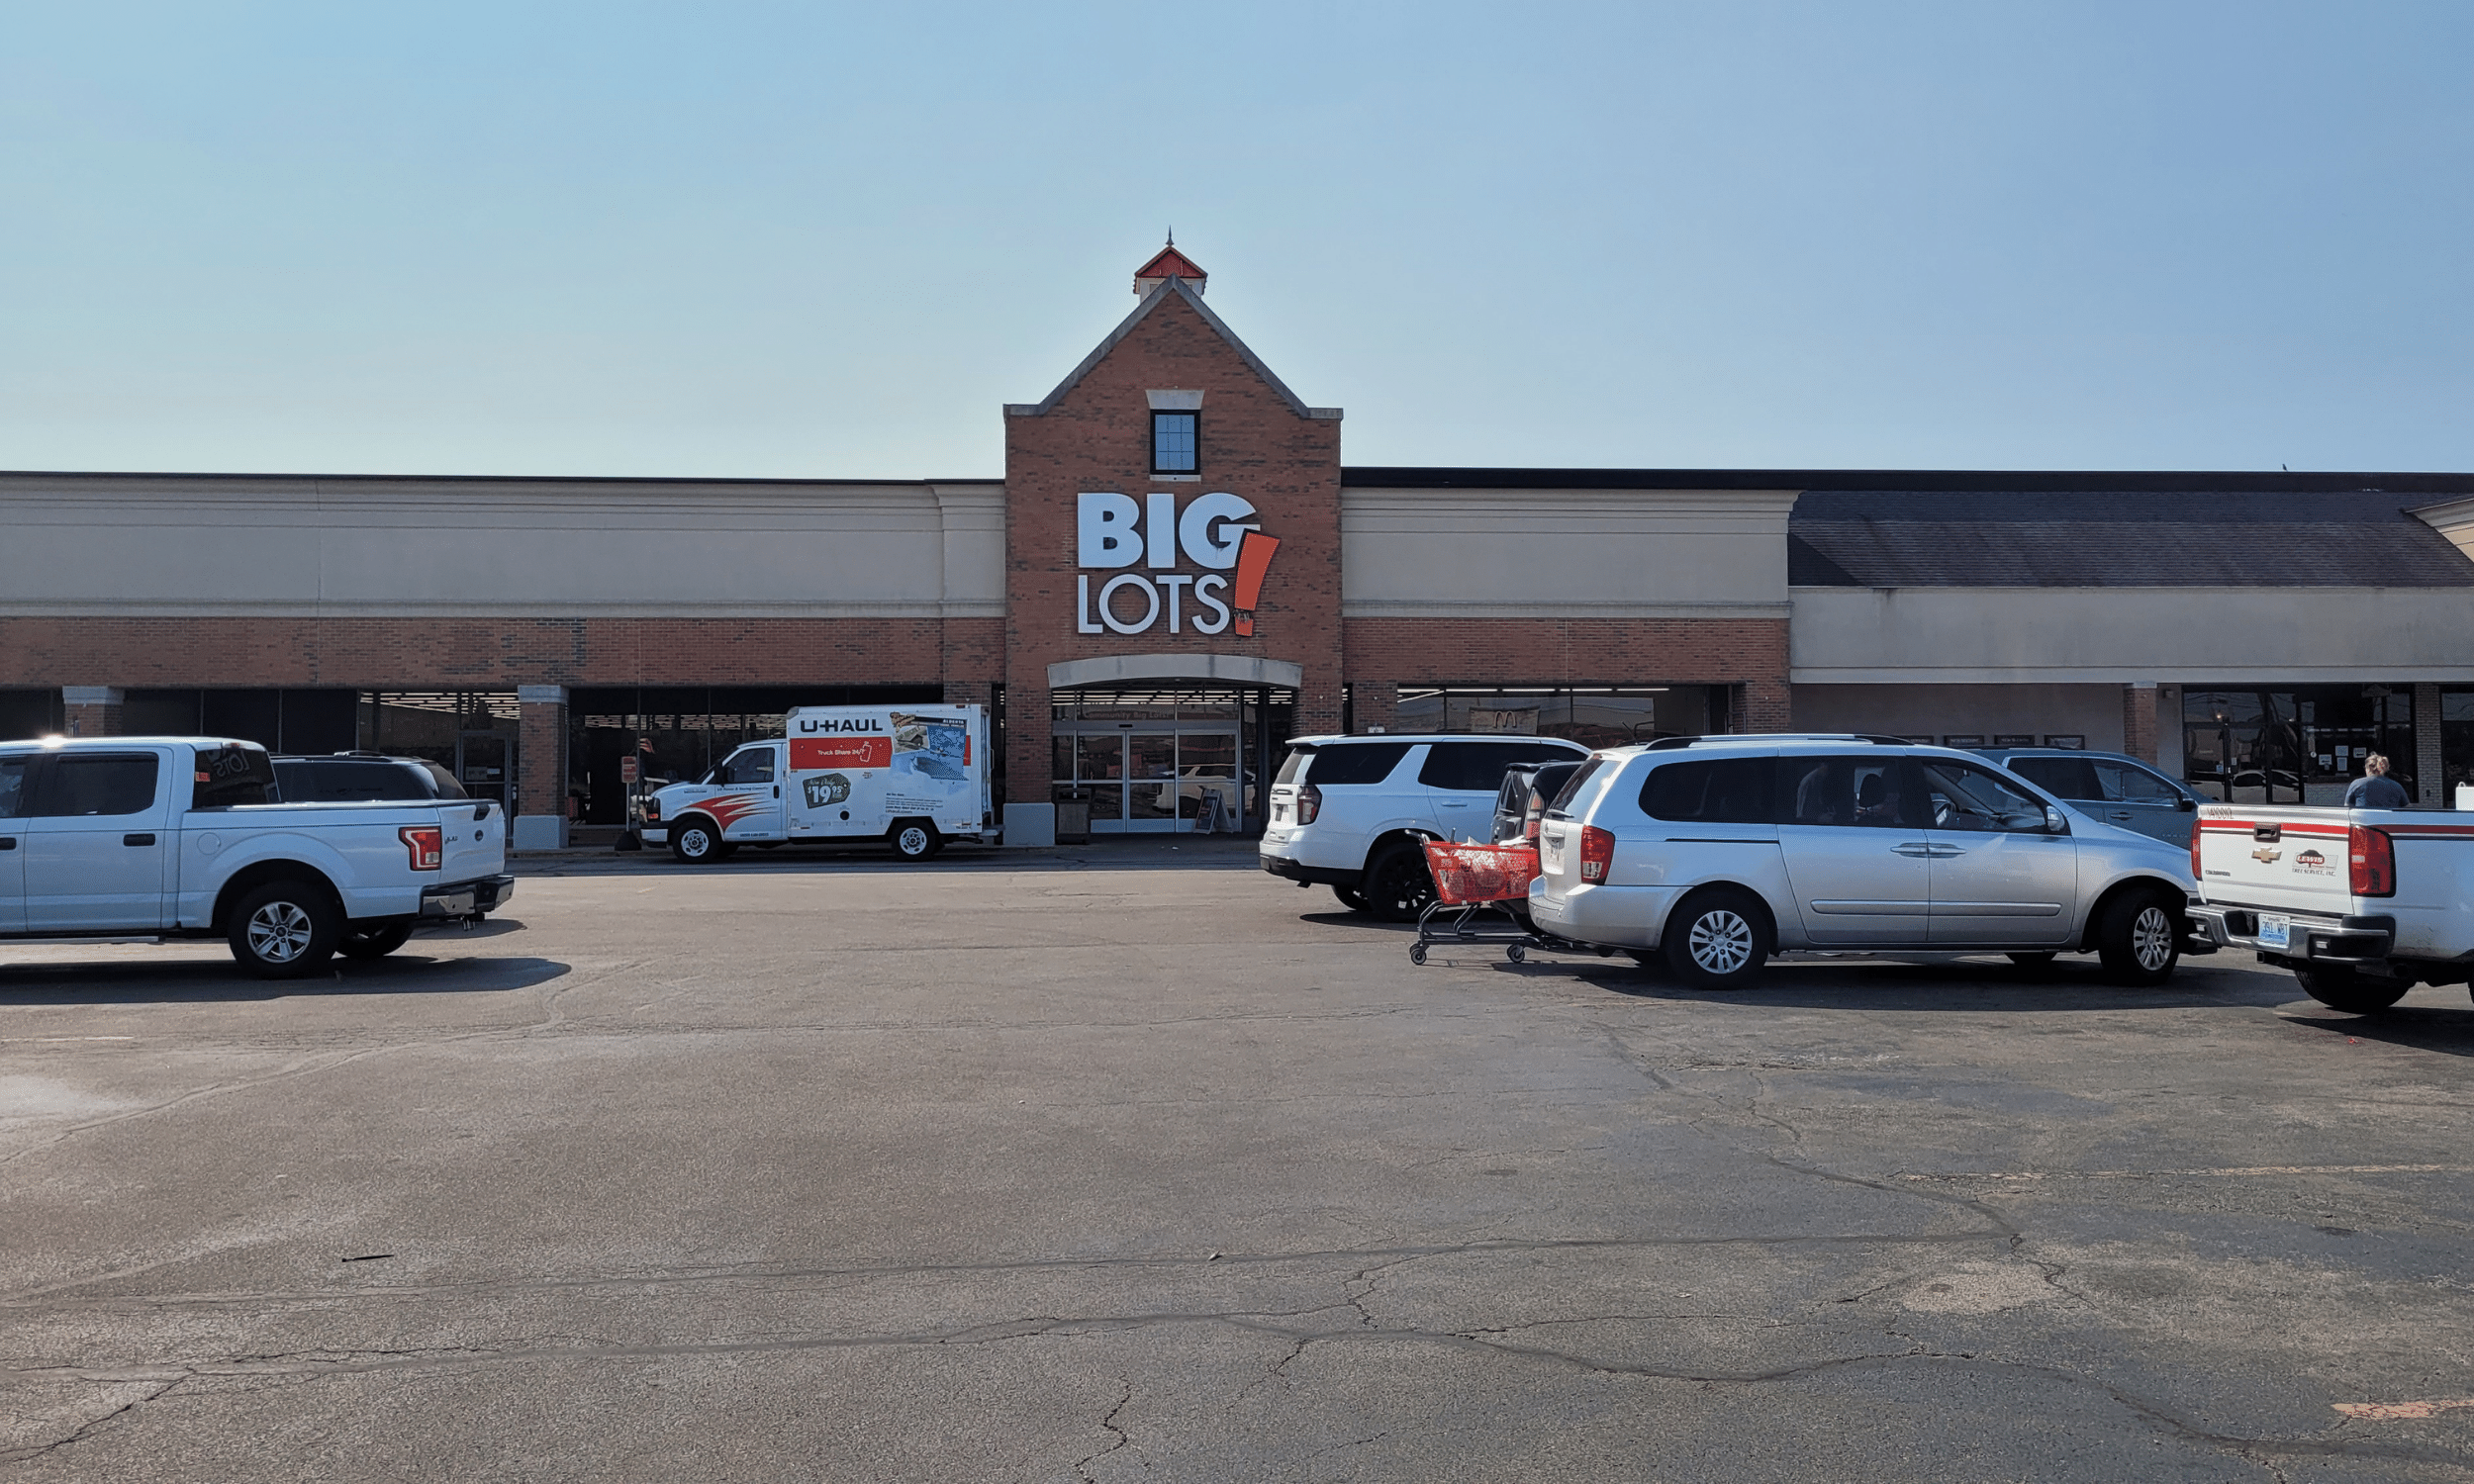 Wilmington Plaza shopping center includes a large Big Lots in Wilmington, OH